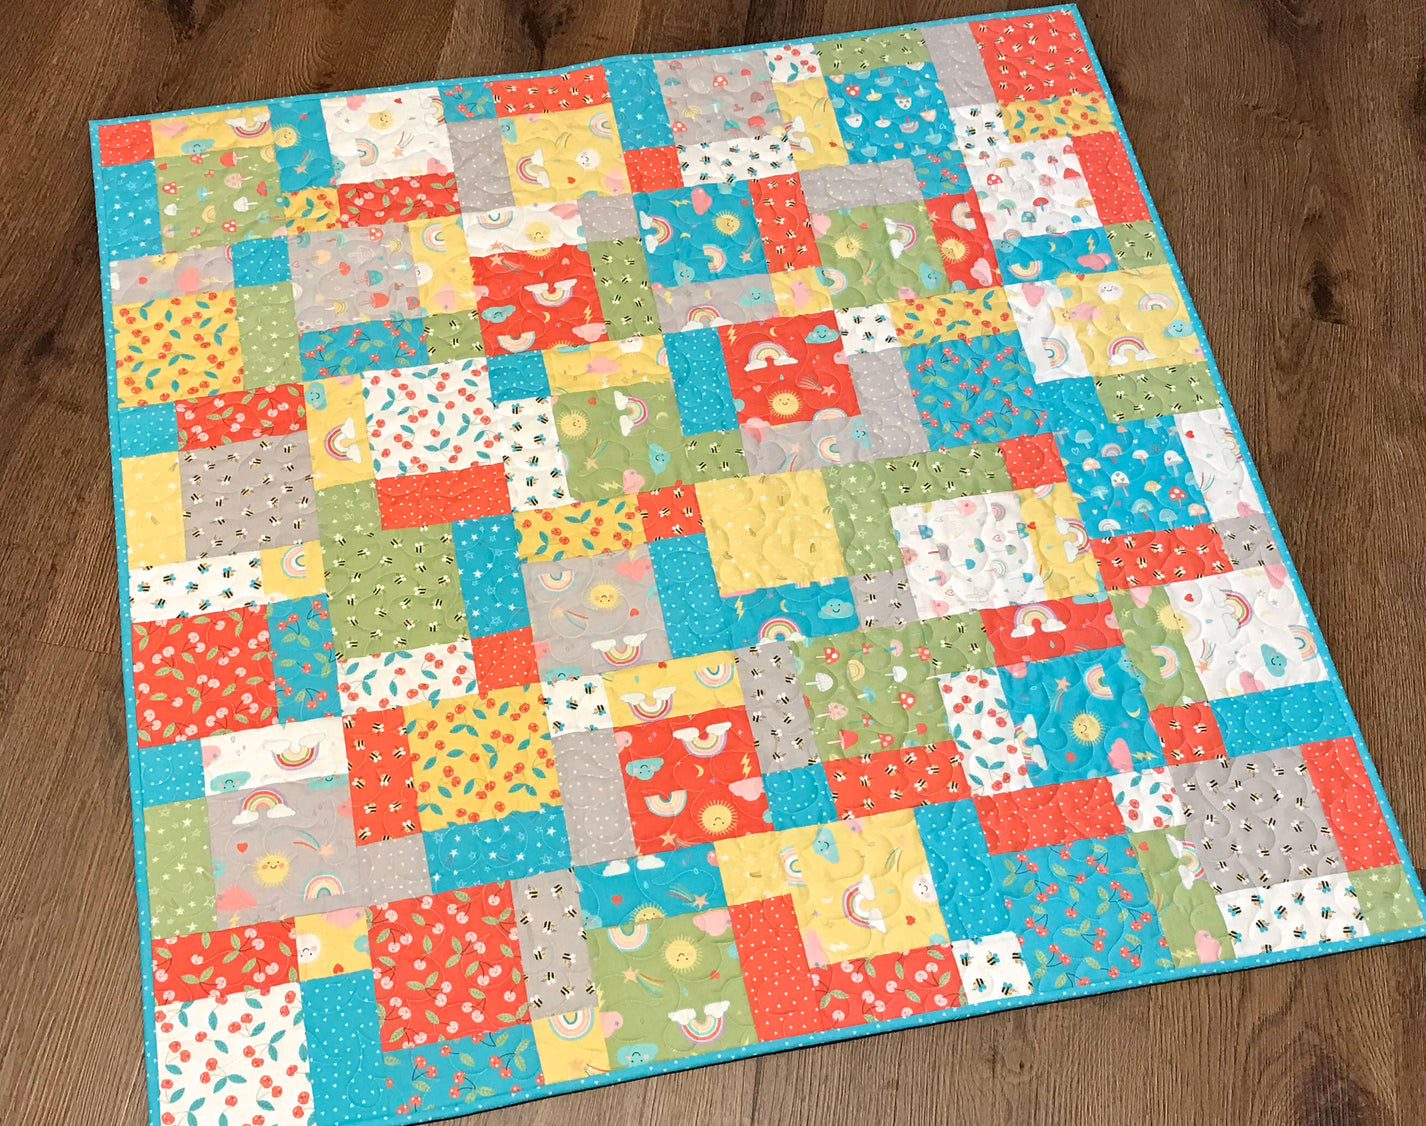 Charming Baby Quilt Pattern for Charm Squares - Digital Quilt Pattern ...